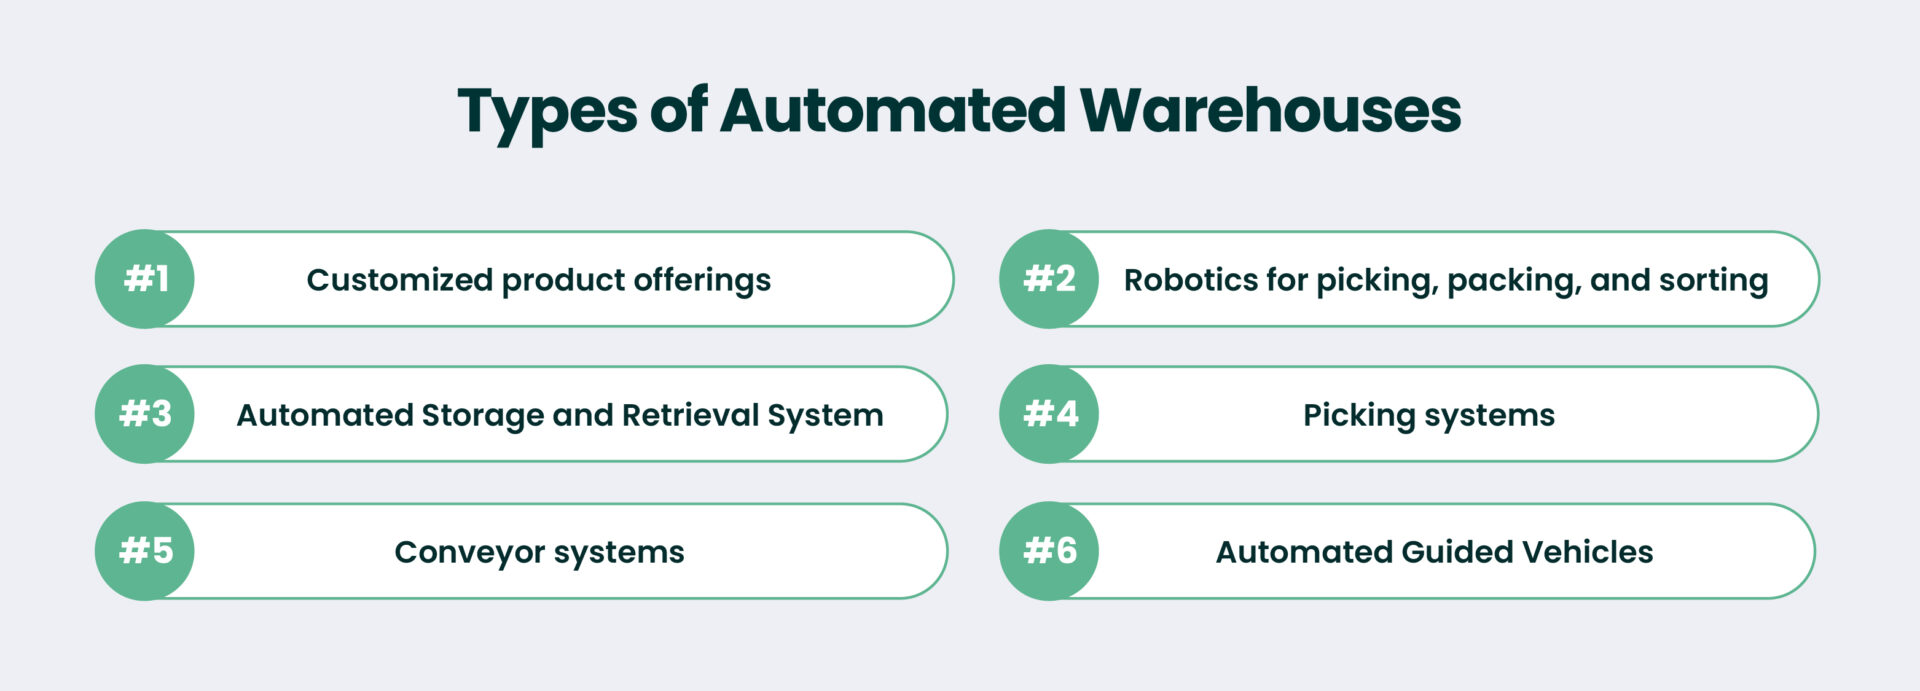 Types of Automated Warehouses